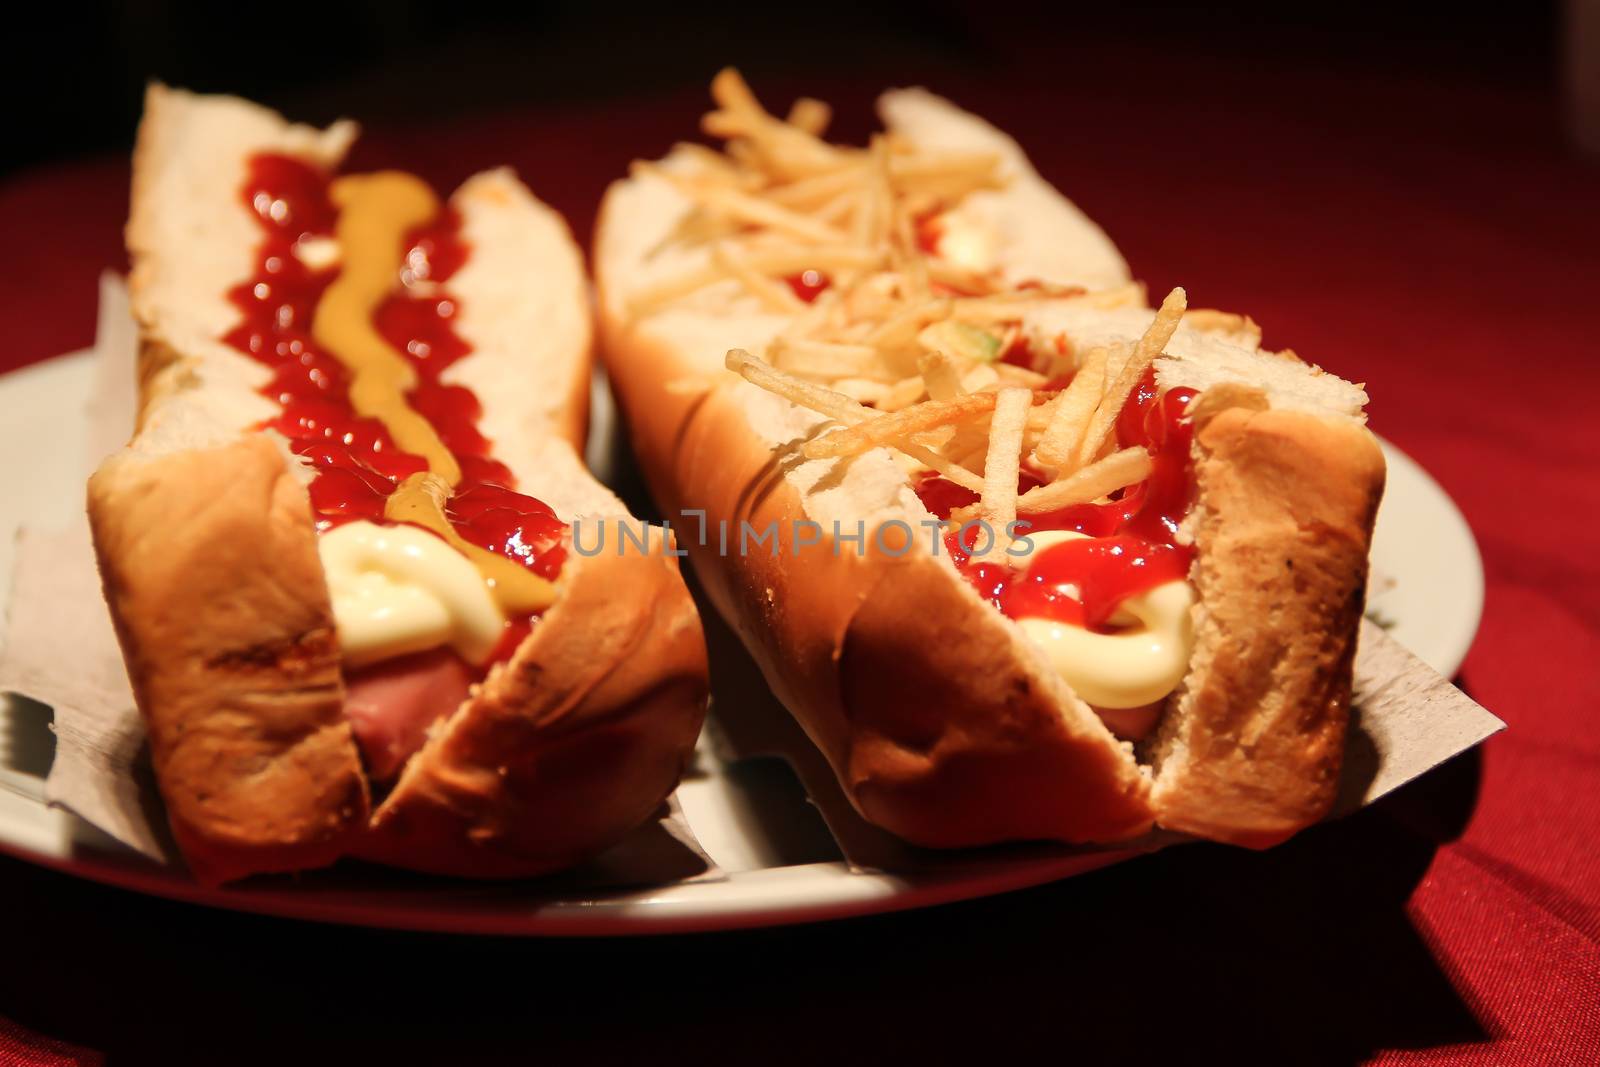 big hot dog with sauces and french fries